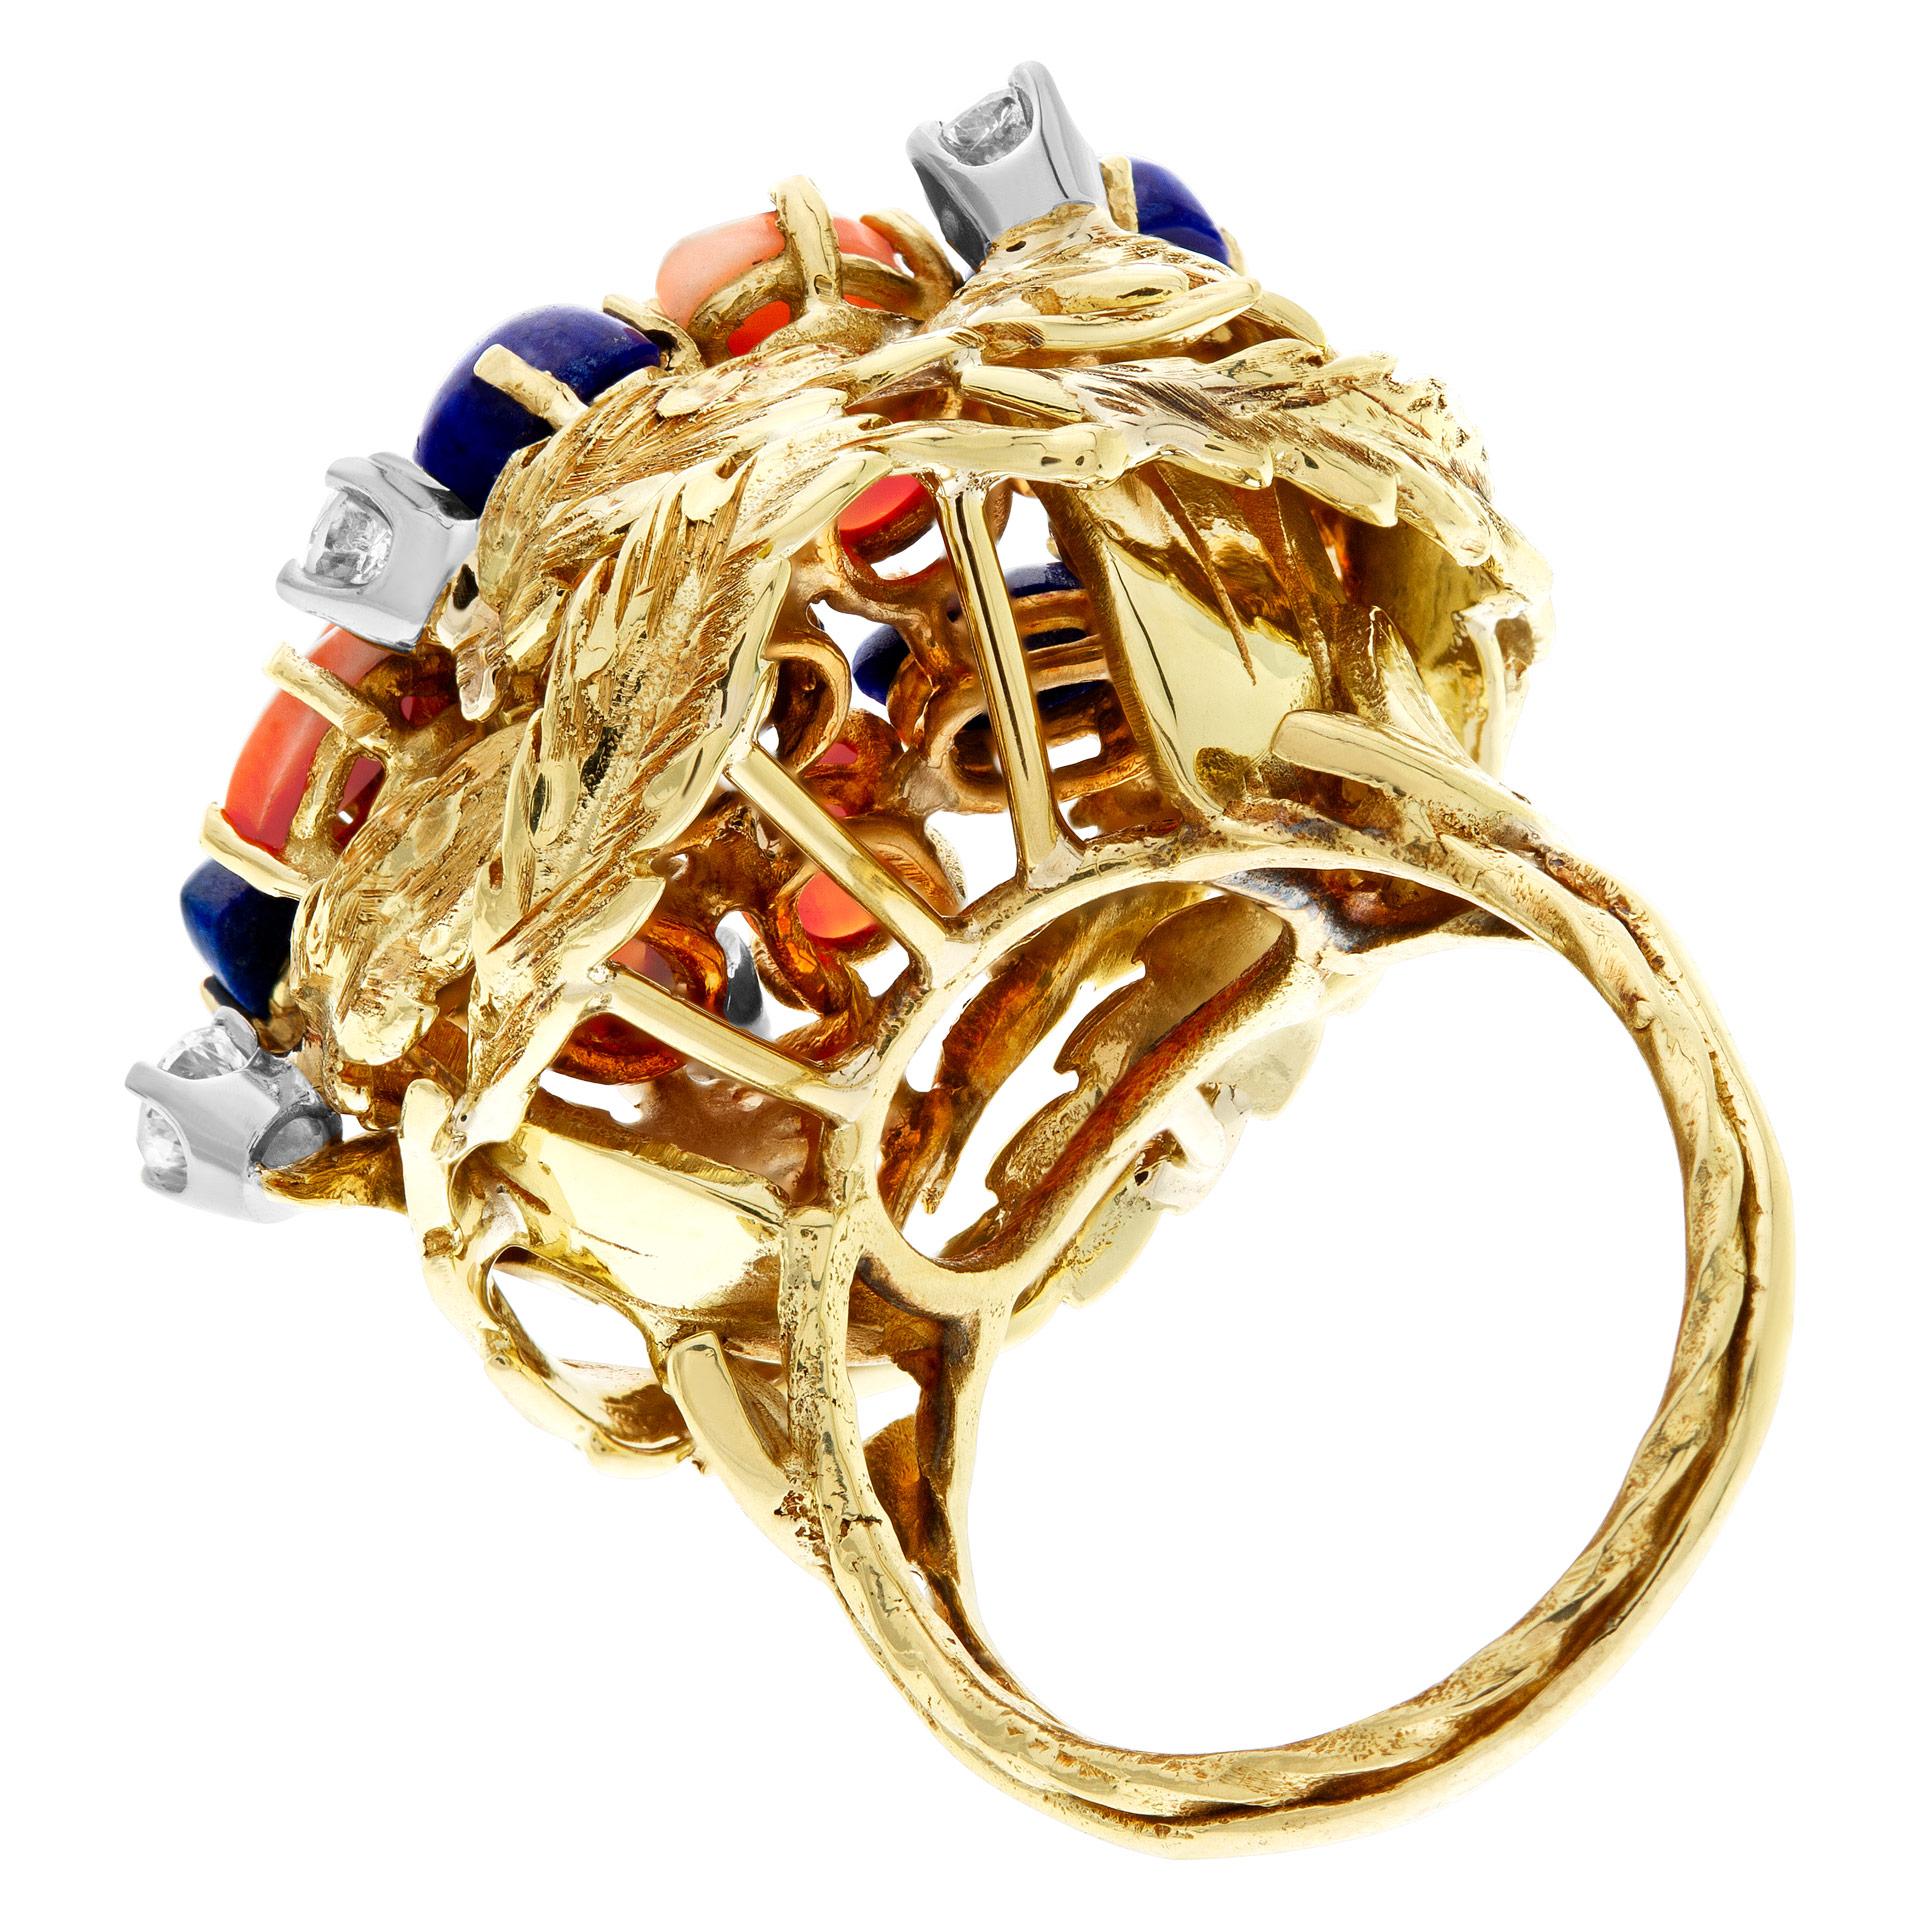 Women's or Men's Lapiz Lazuli & Coral Garden Ring in 18k Yellow Gold with Diamond Accents